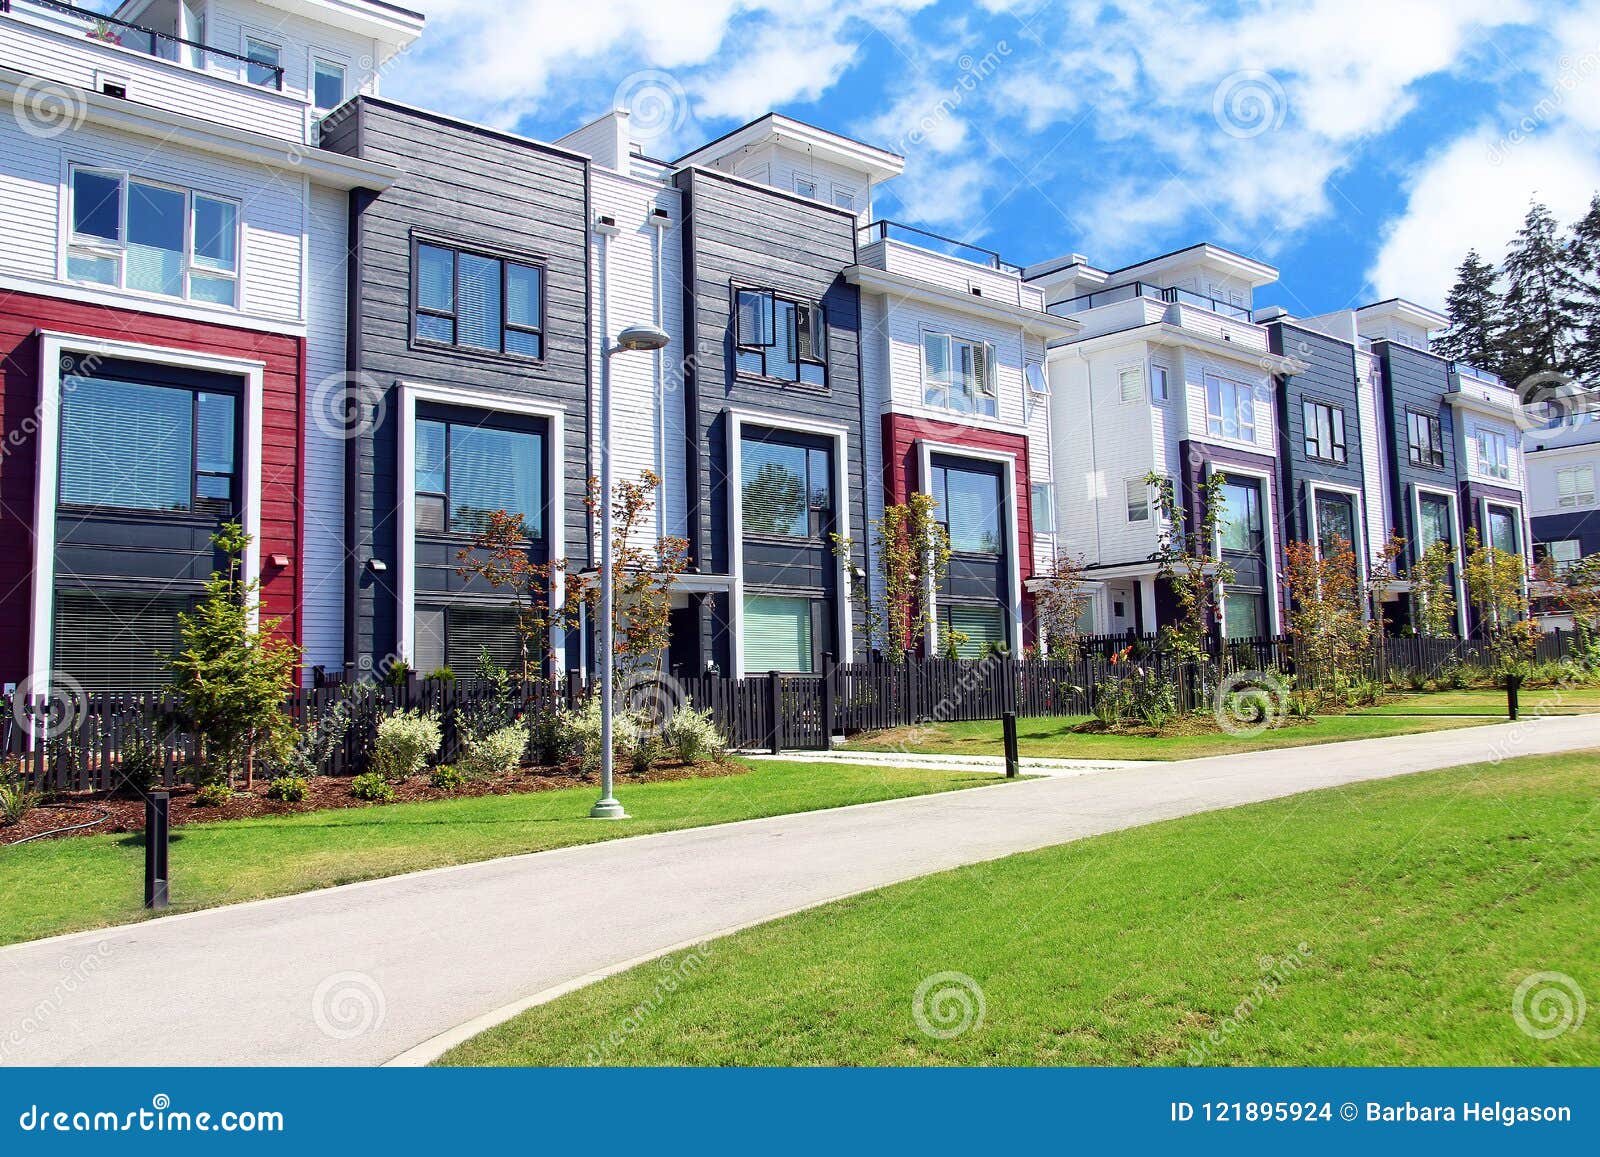 Beautiful new contempory suburban attached townhomes with colorful summer gardens in a Canadian neighborhood.